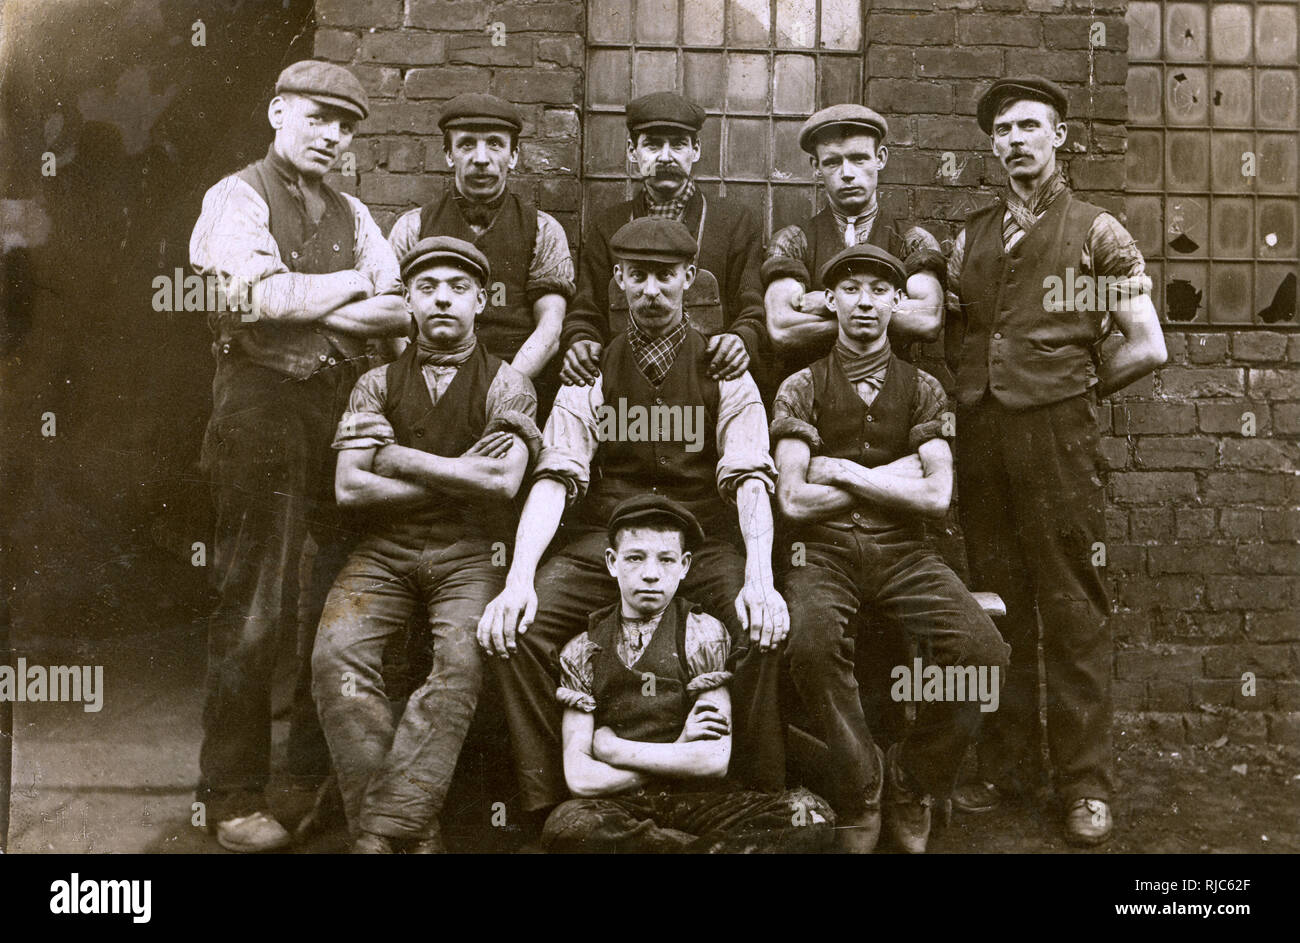 Lancashire engineering factory workers Stock Photo